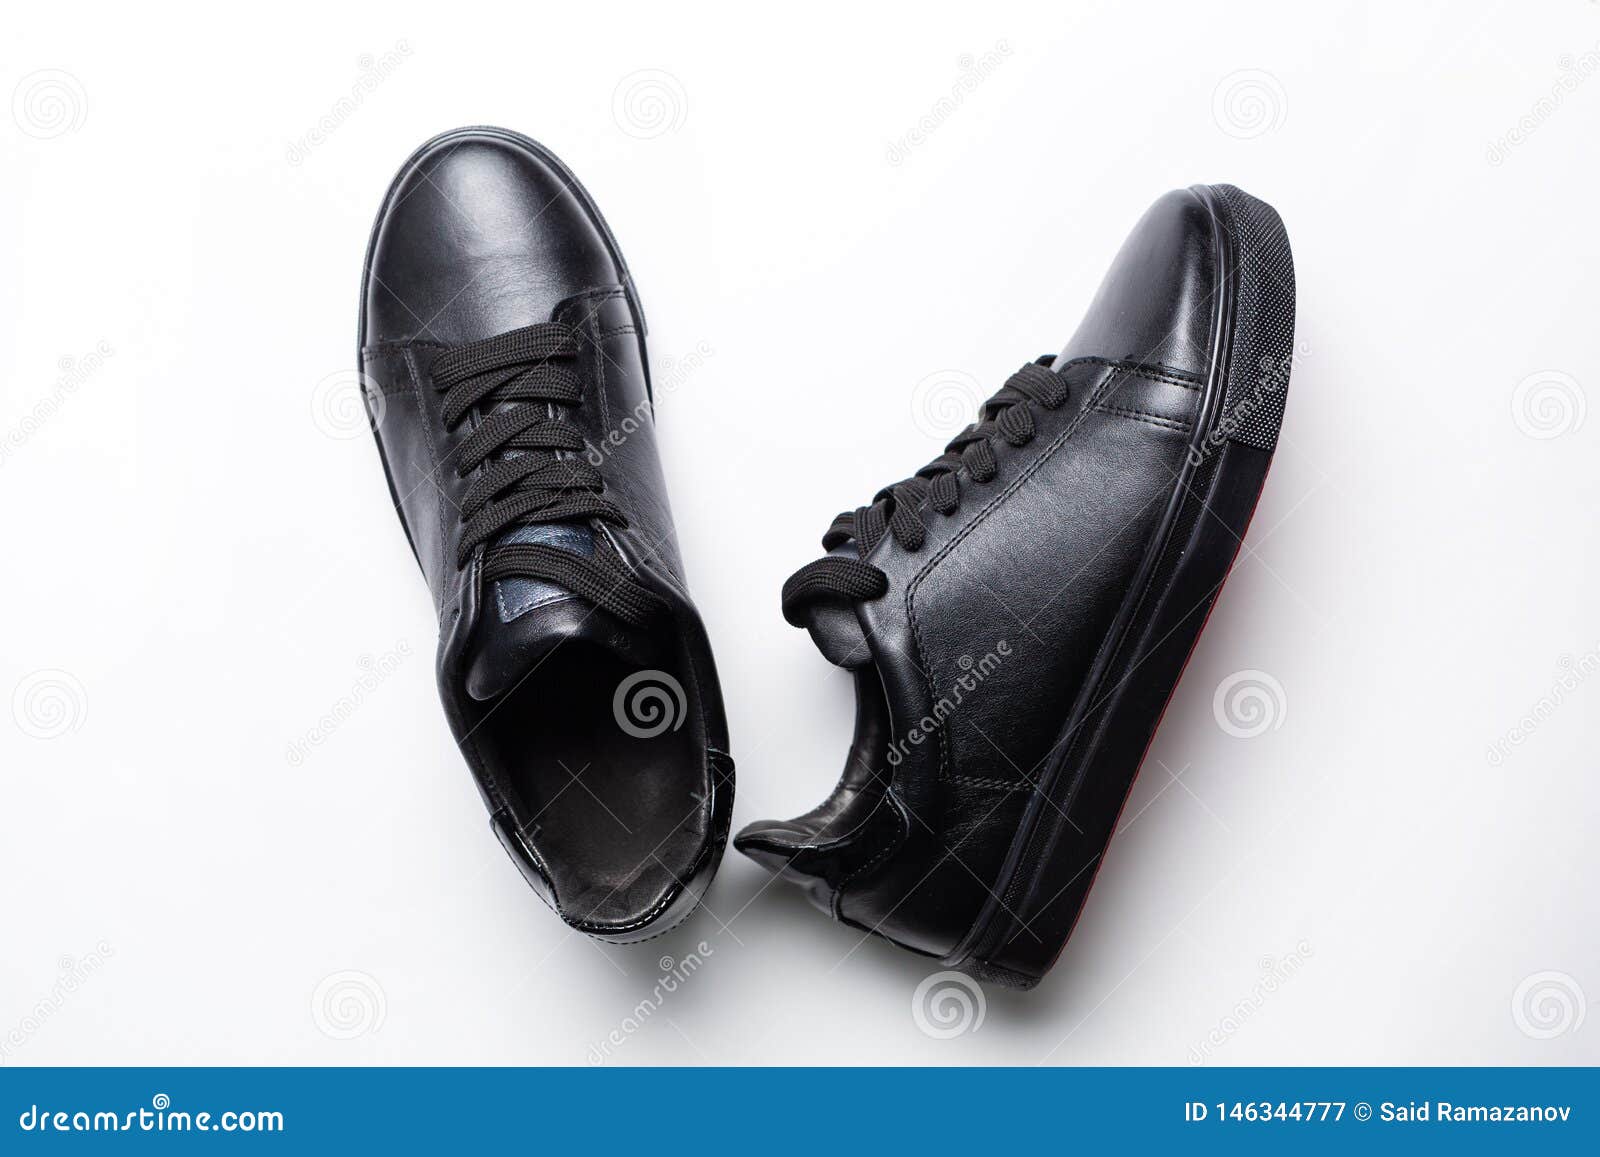 A Pair of Black Trendy Sneakers on the White Background Stock Image ...